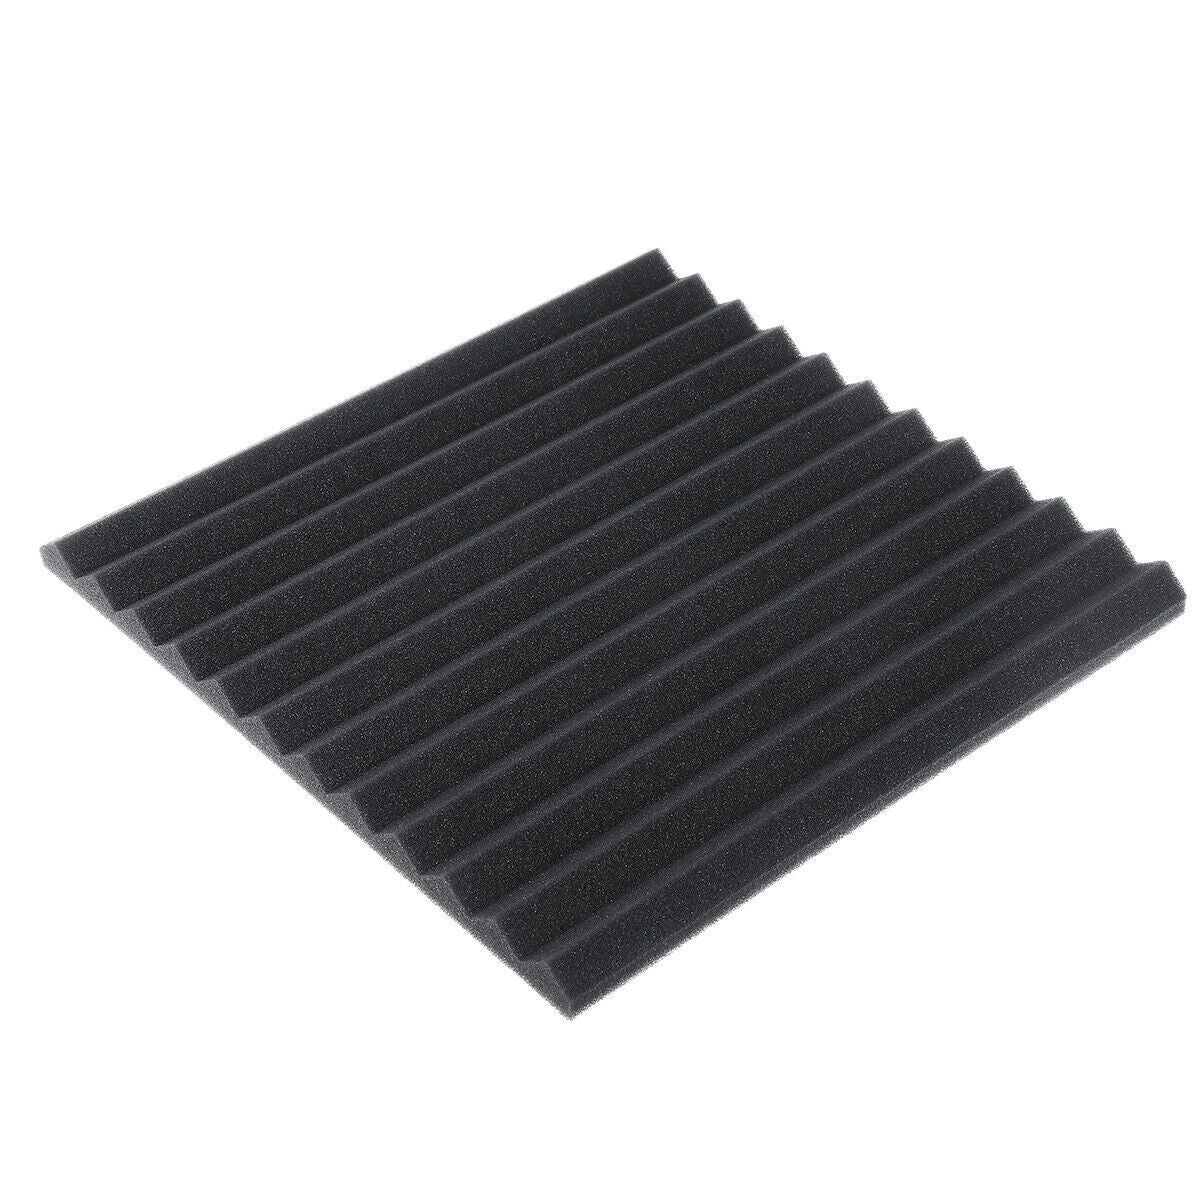 Studio Acoustic Foam Sound Absorbtion Proofing Panels Wedge Soundproof